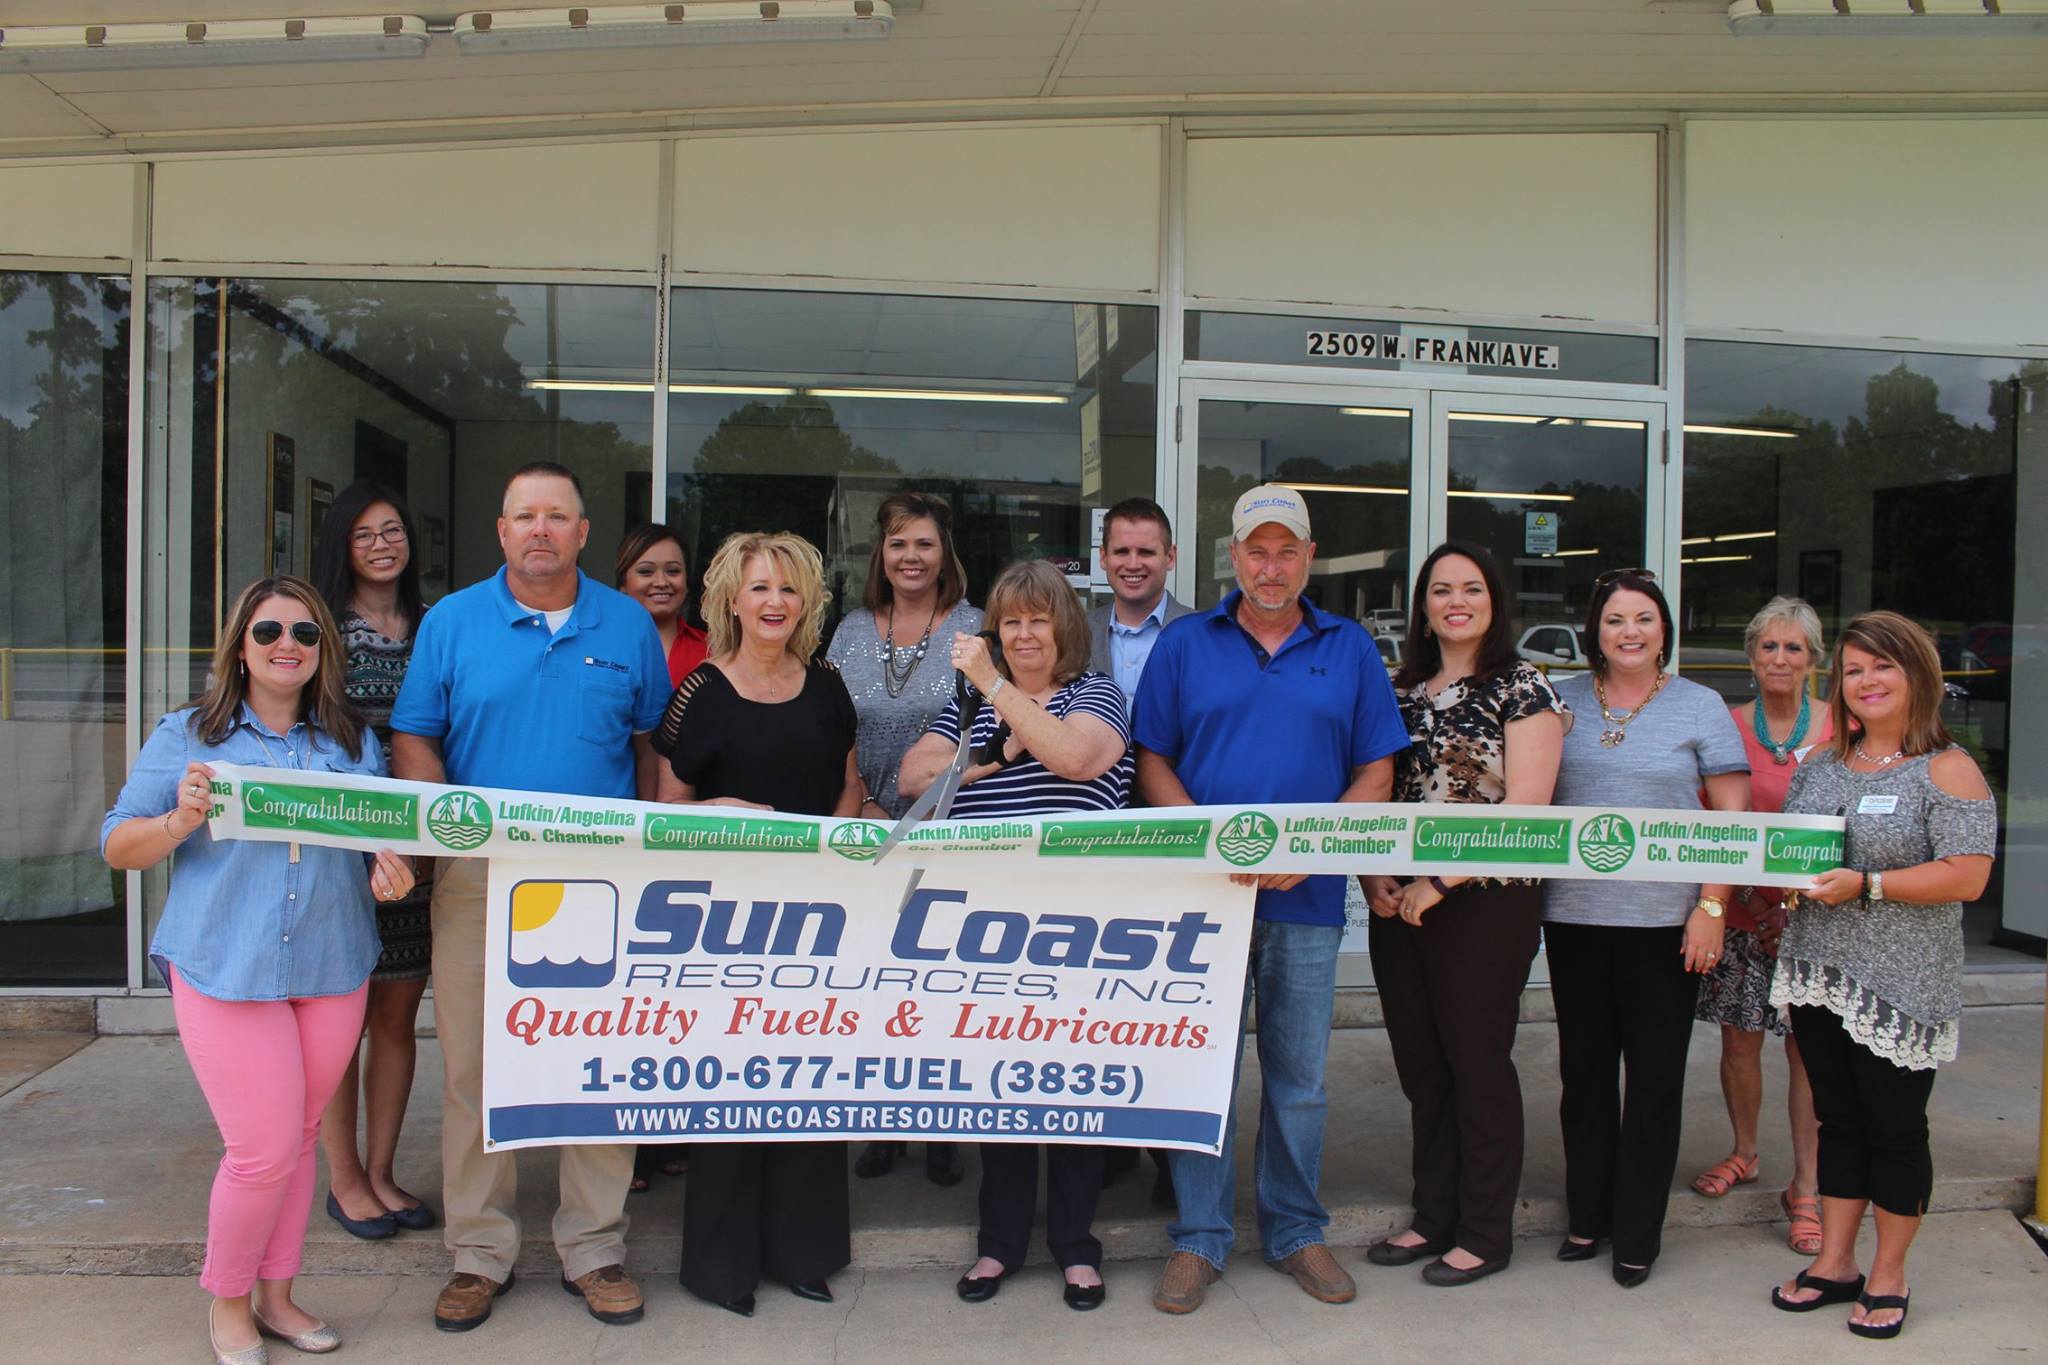 Sun Coast Resources joining Lufkin Chamber of Commerce.